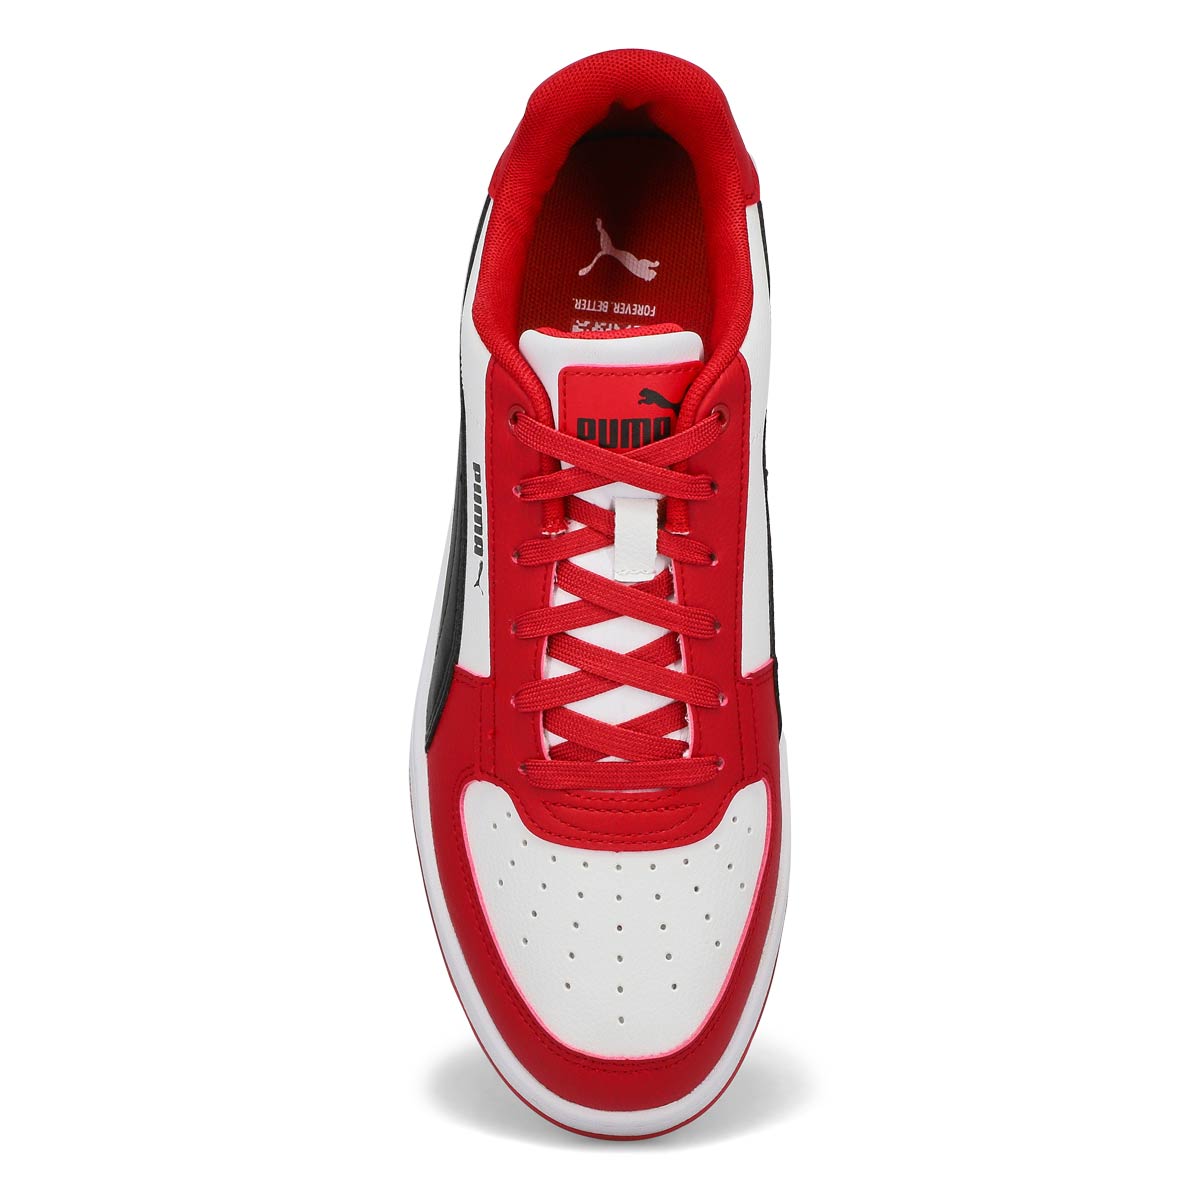 Mens Caven 2.0 Lace Up Sneaker - Red/White/Black